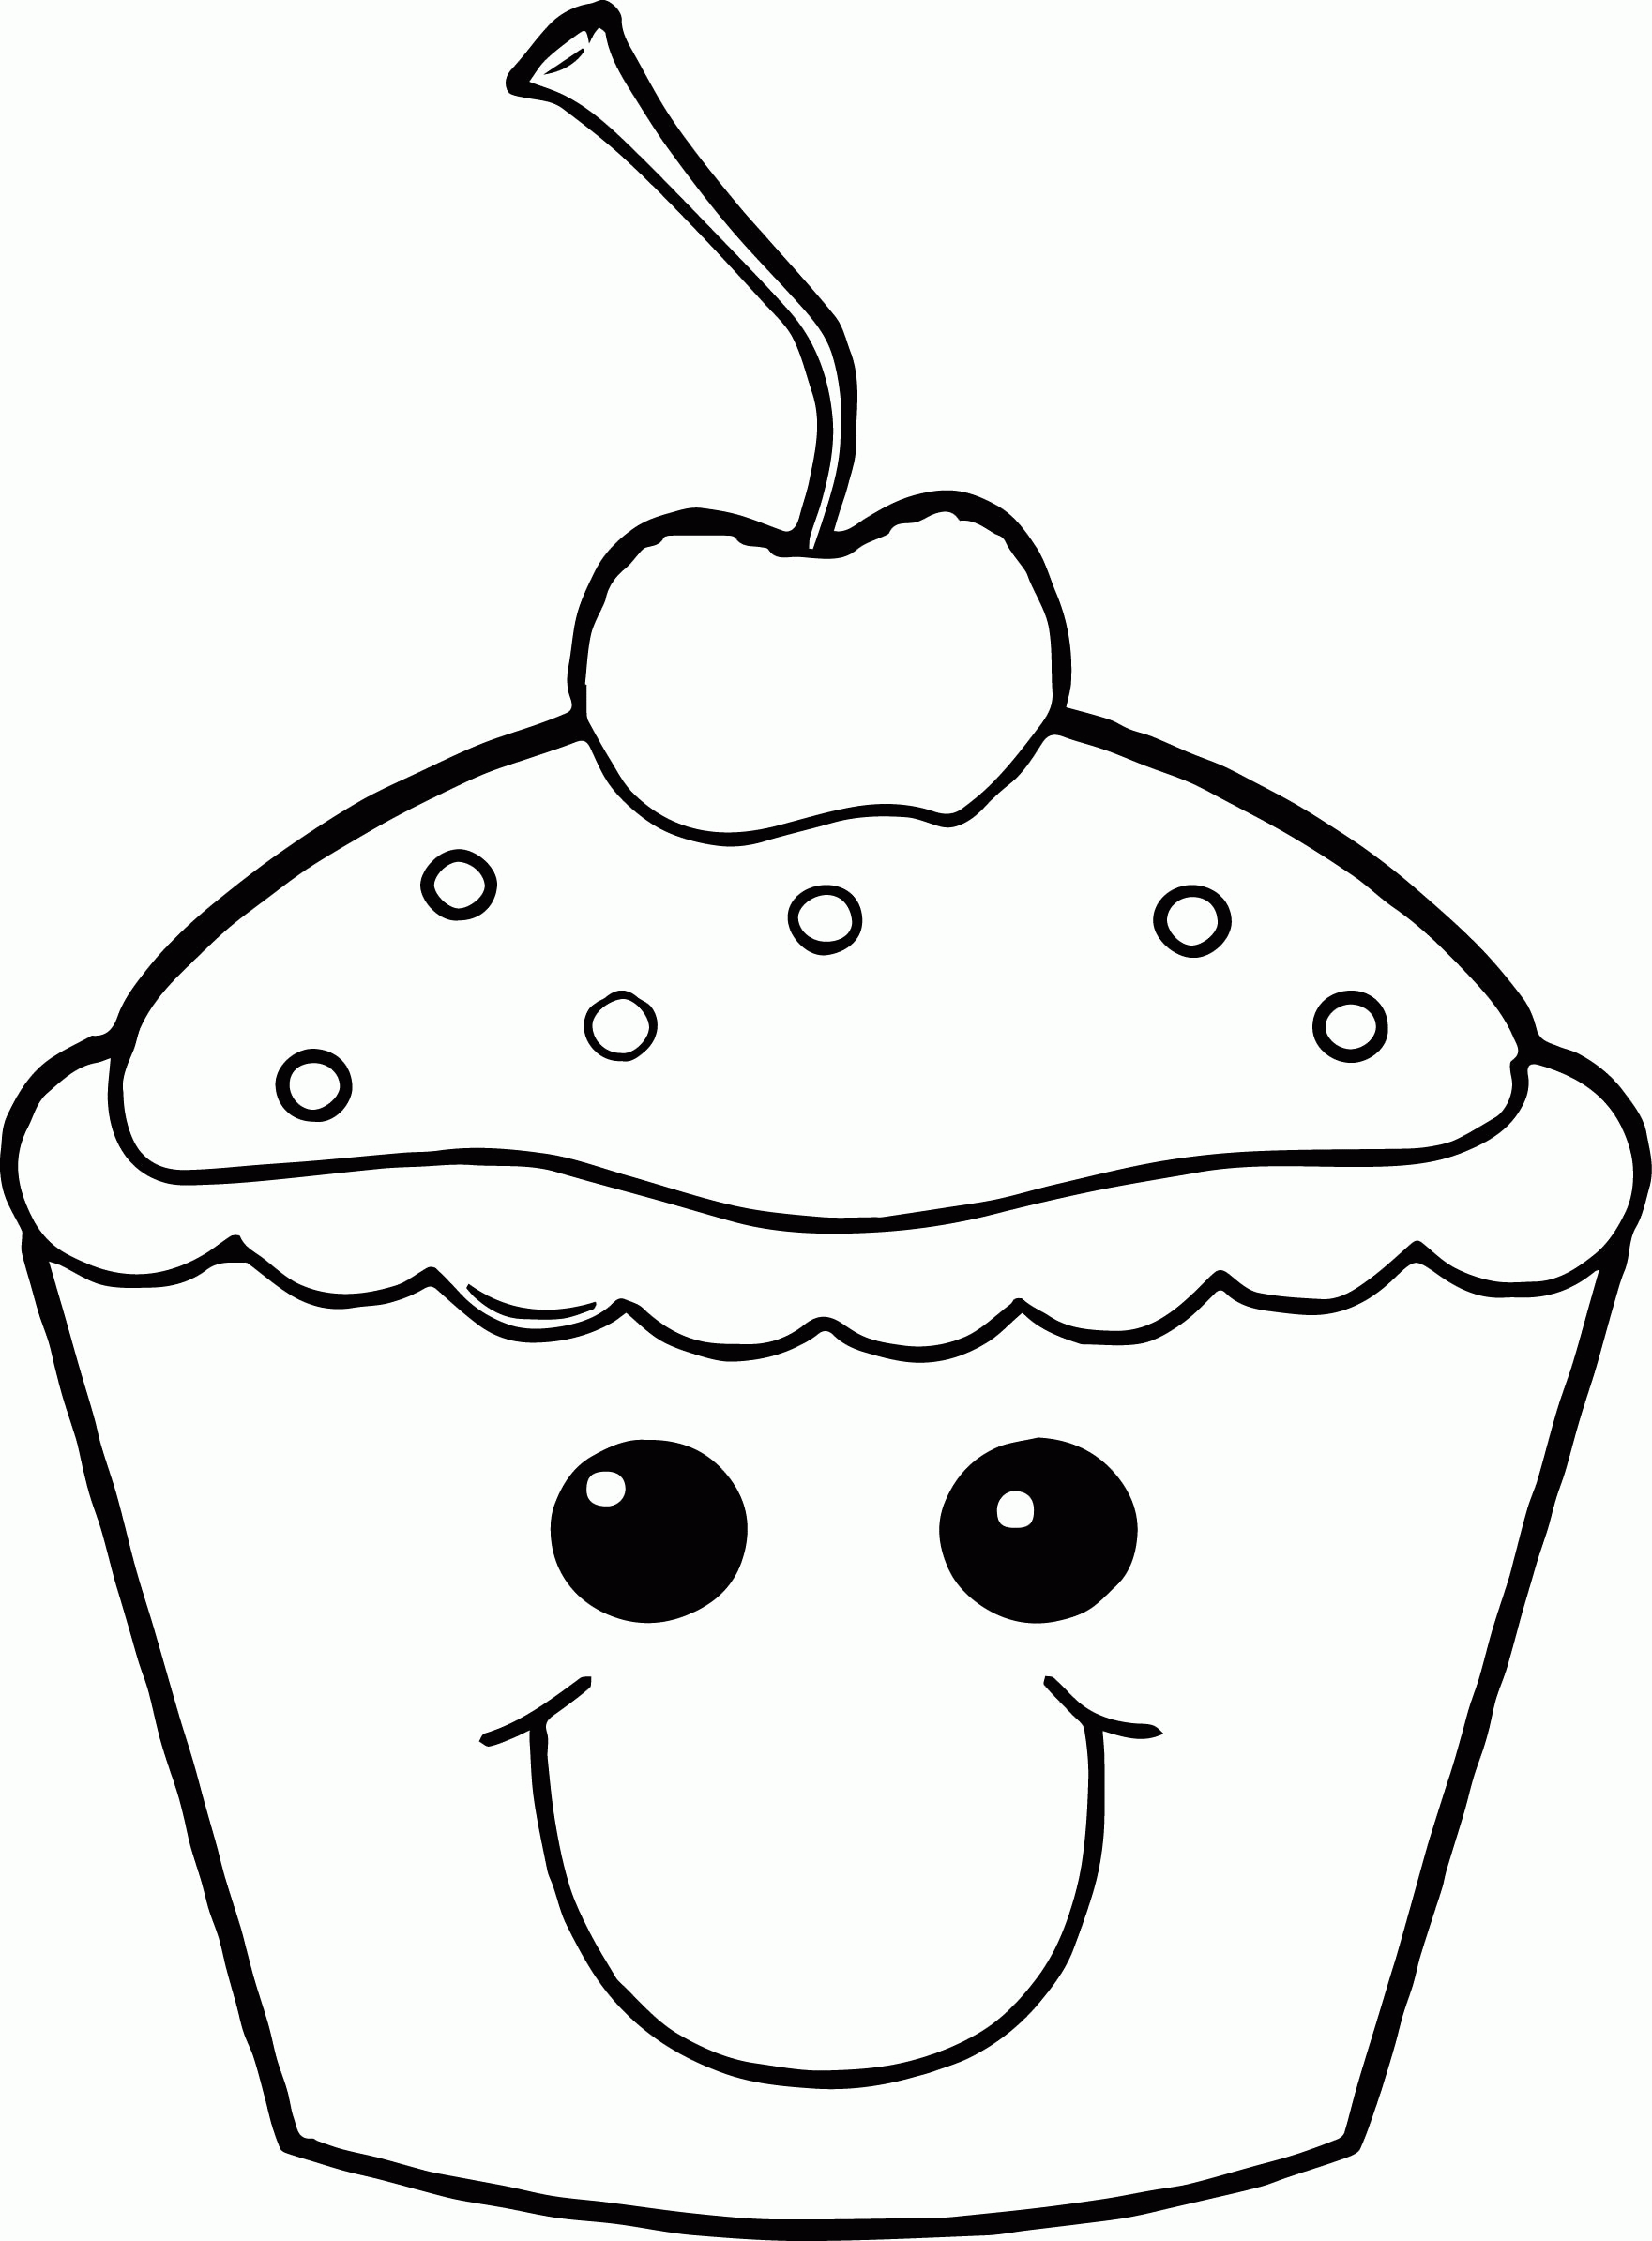 Cup Cake 29 For Kids Coloring Page